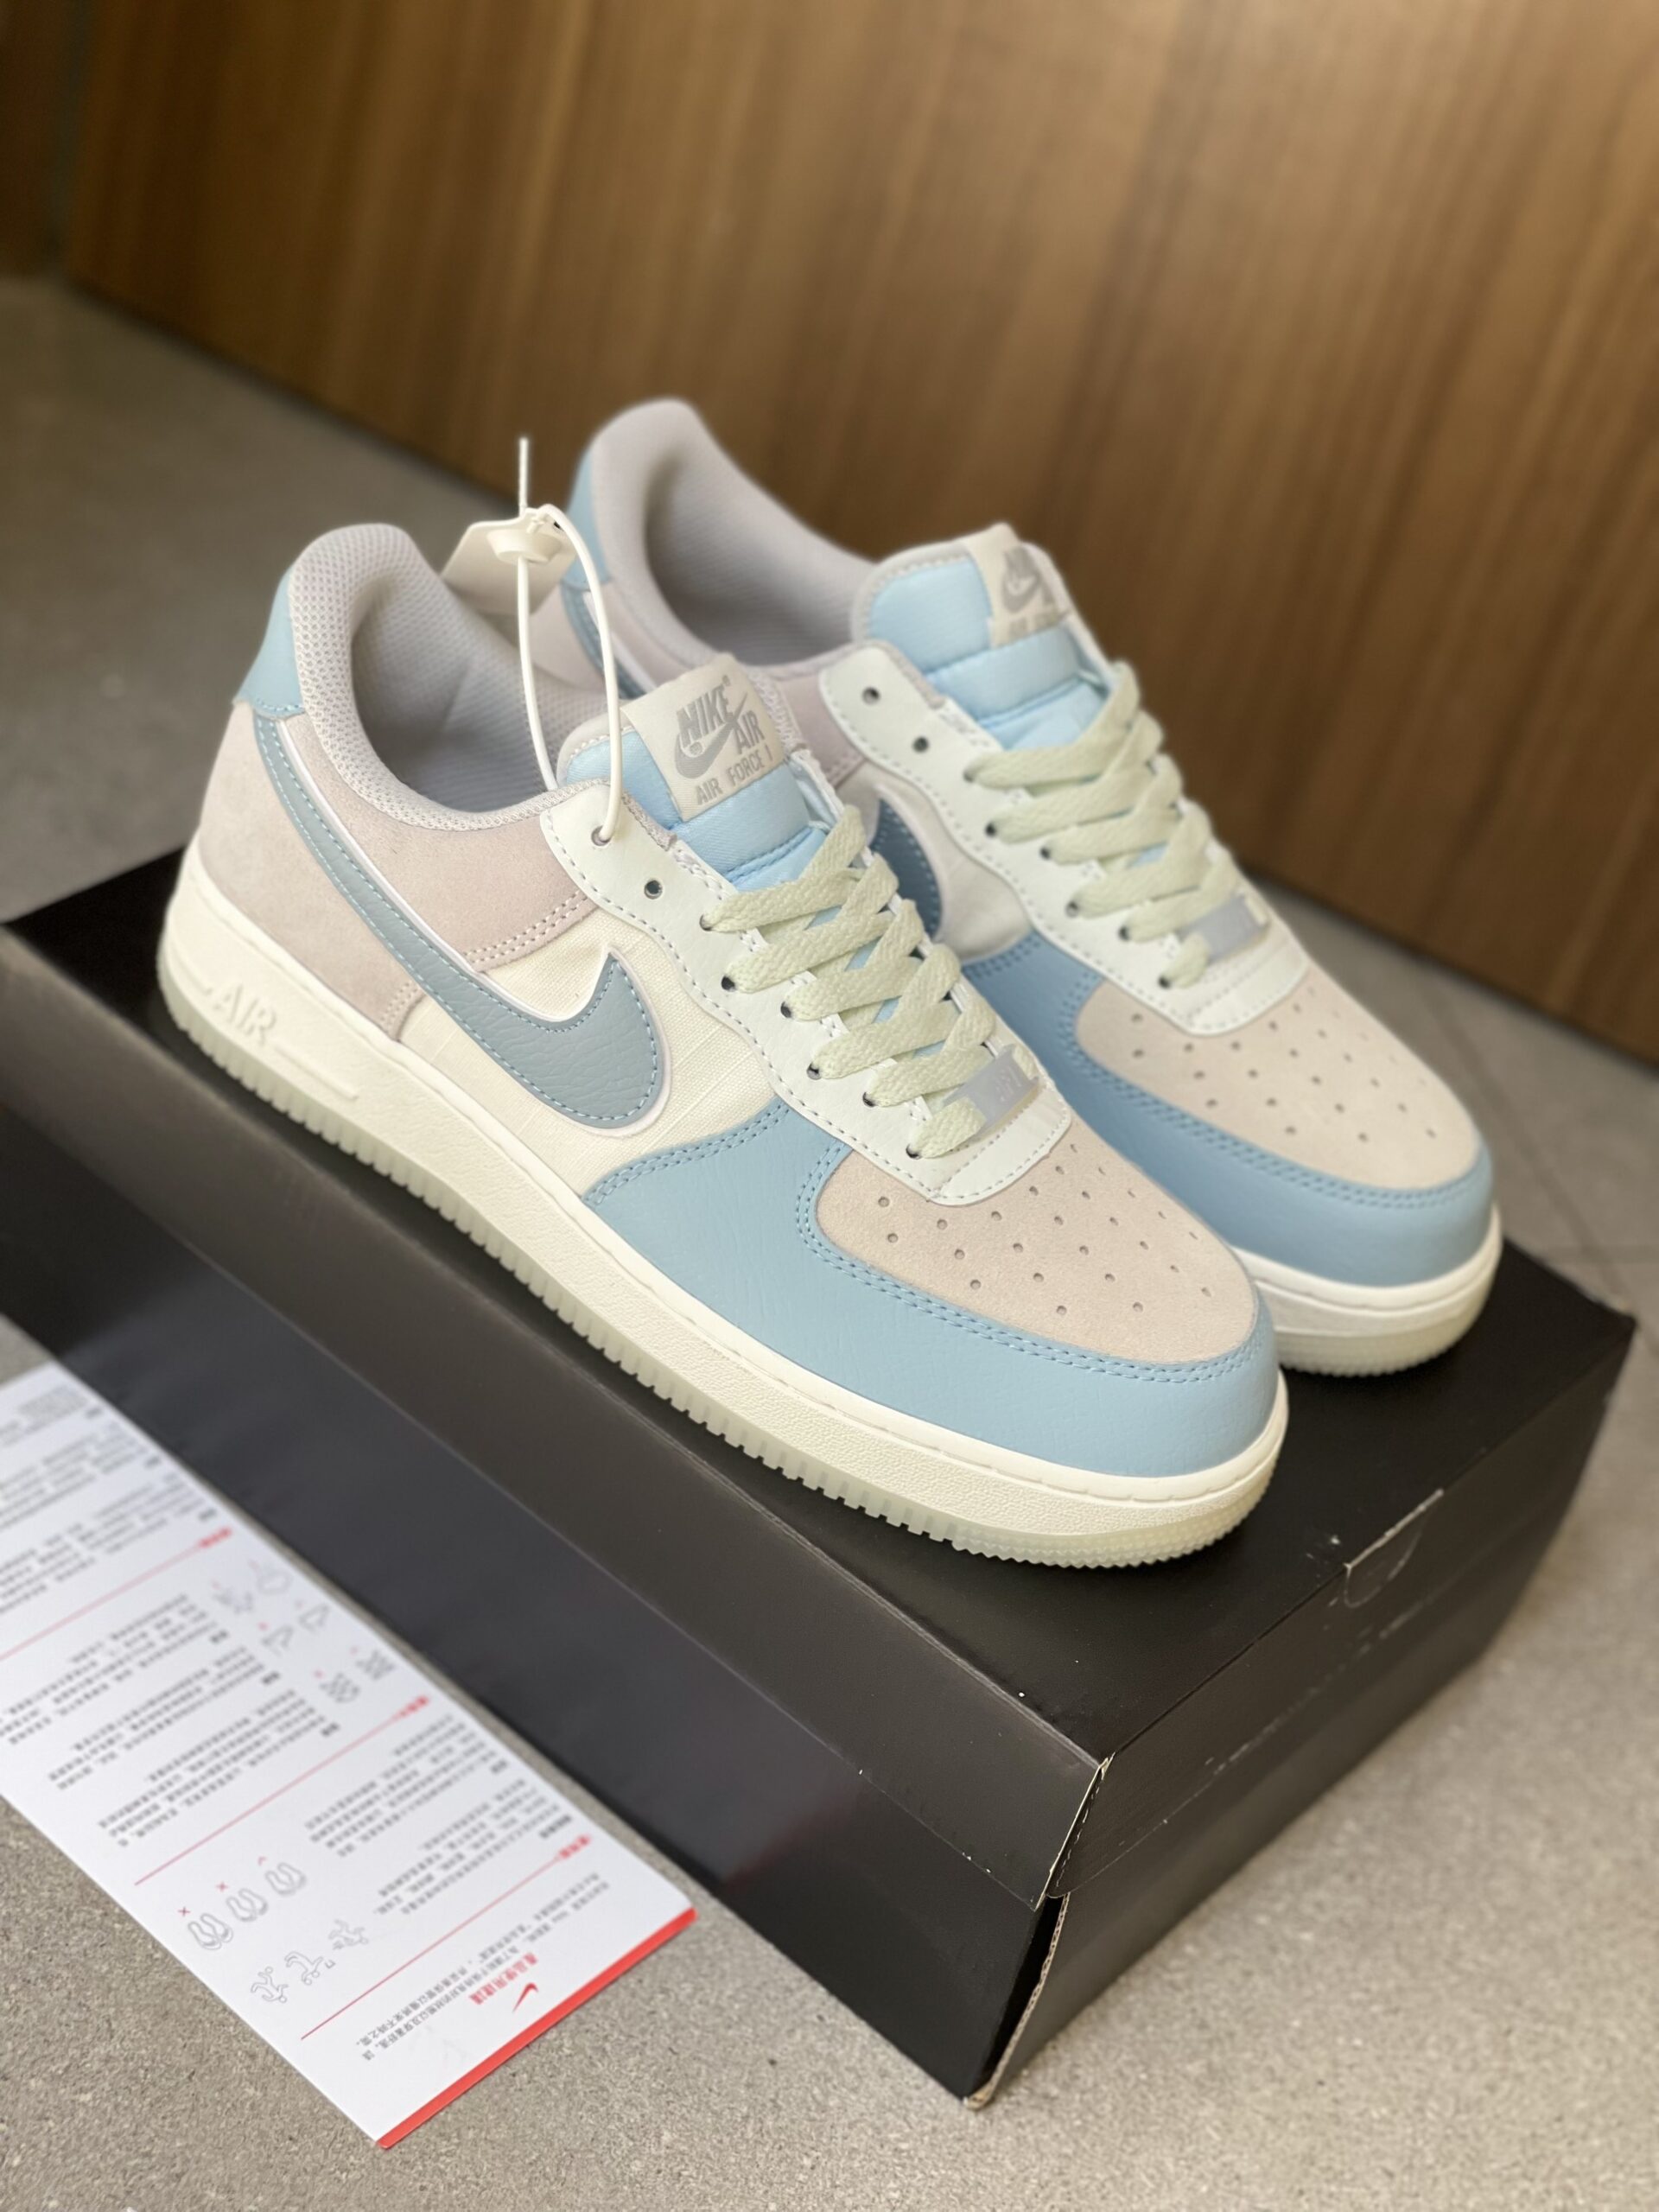 Giày Nike Air Force 1 Low 07 Light Armory Blue Off White Obsidian Mist